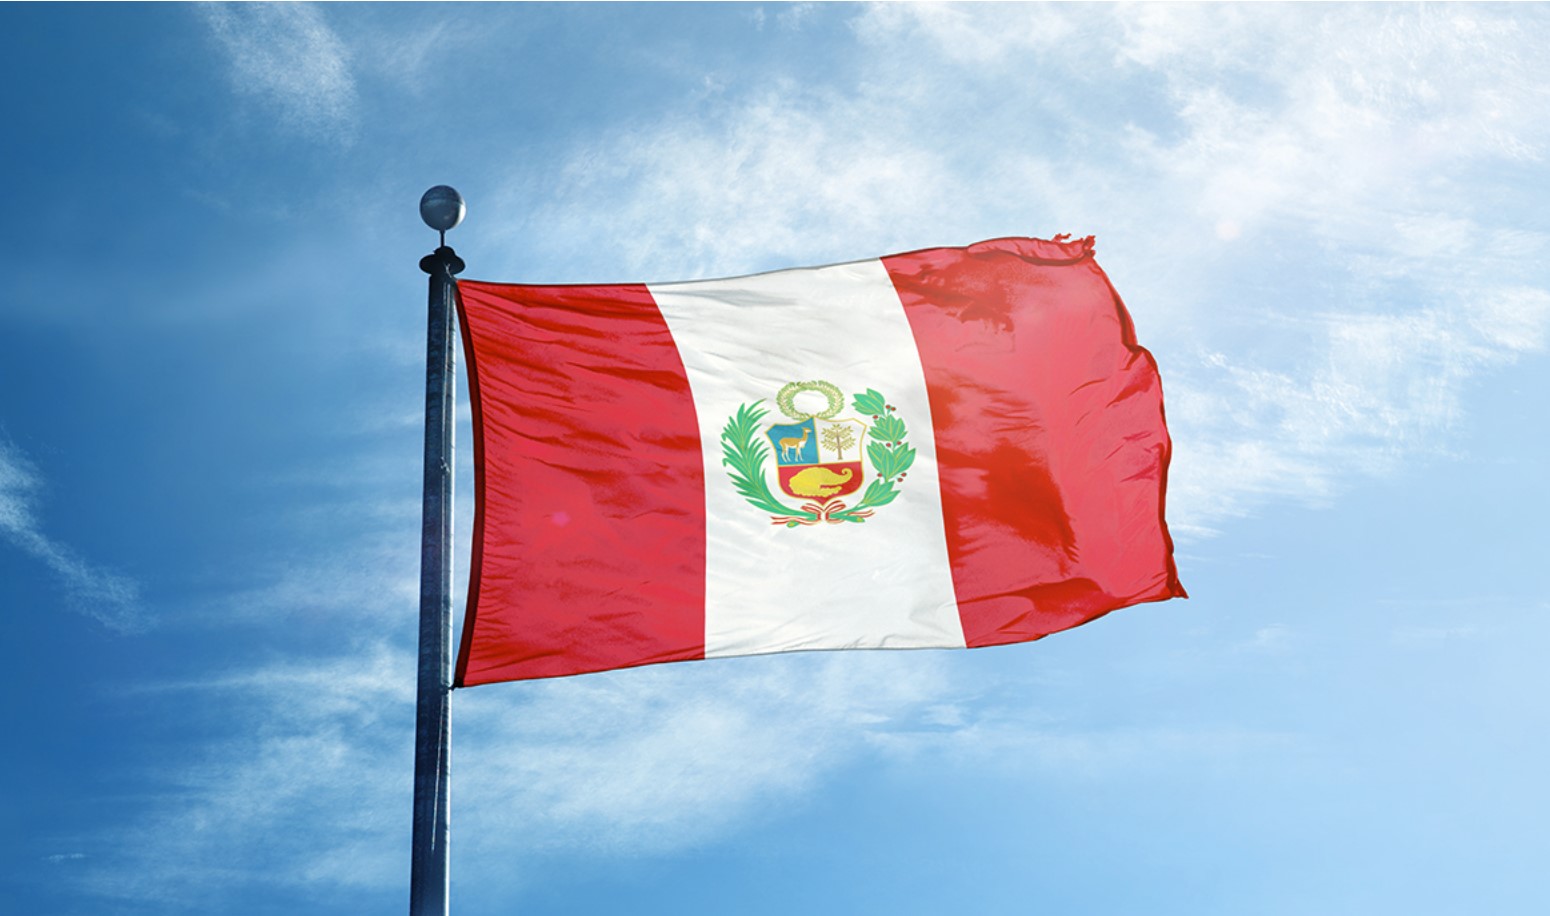 The peruvian flag flying over a blue sky